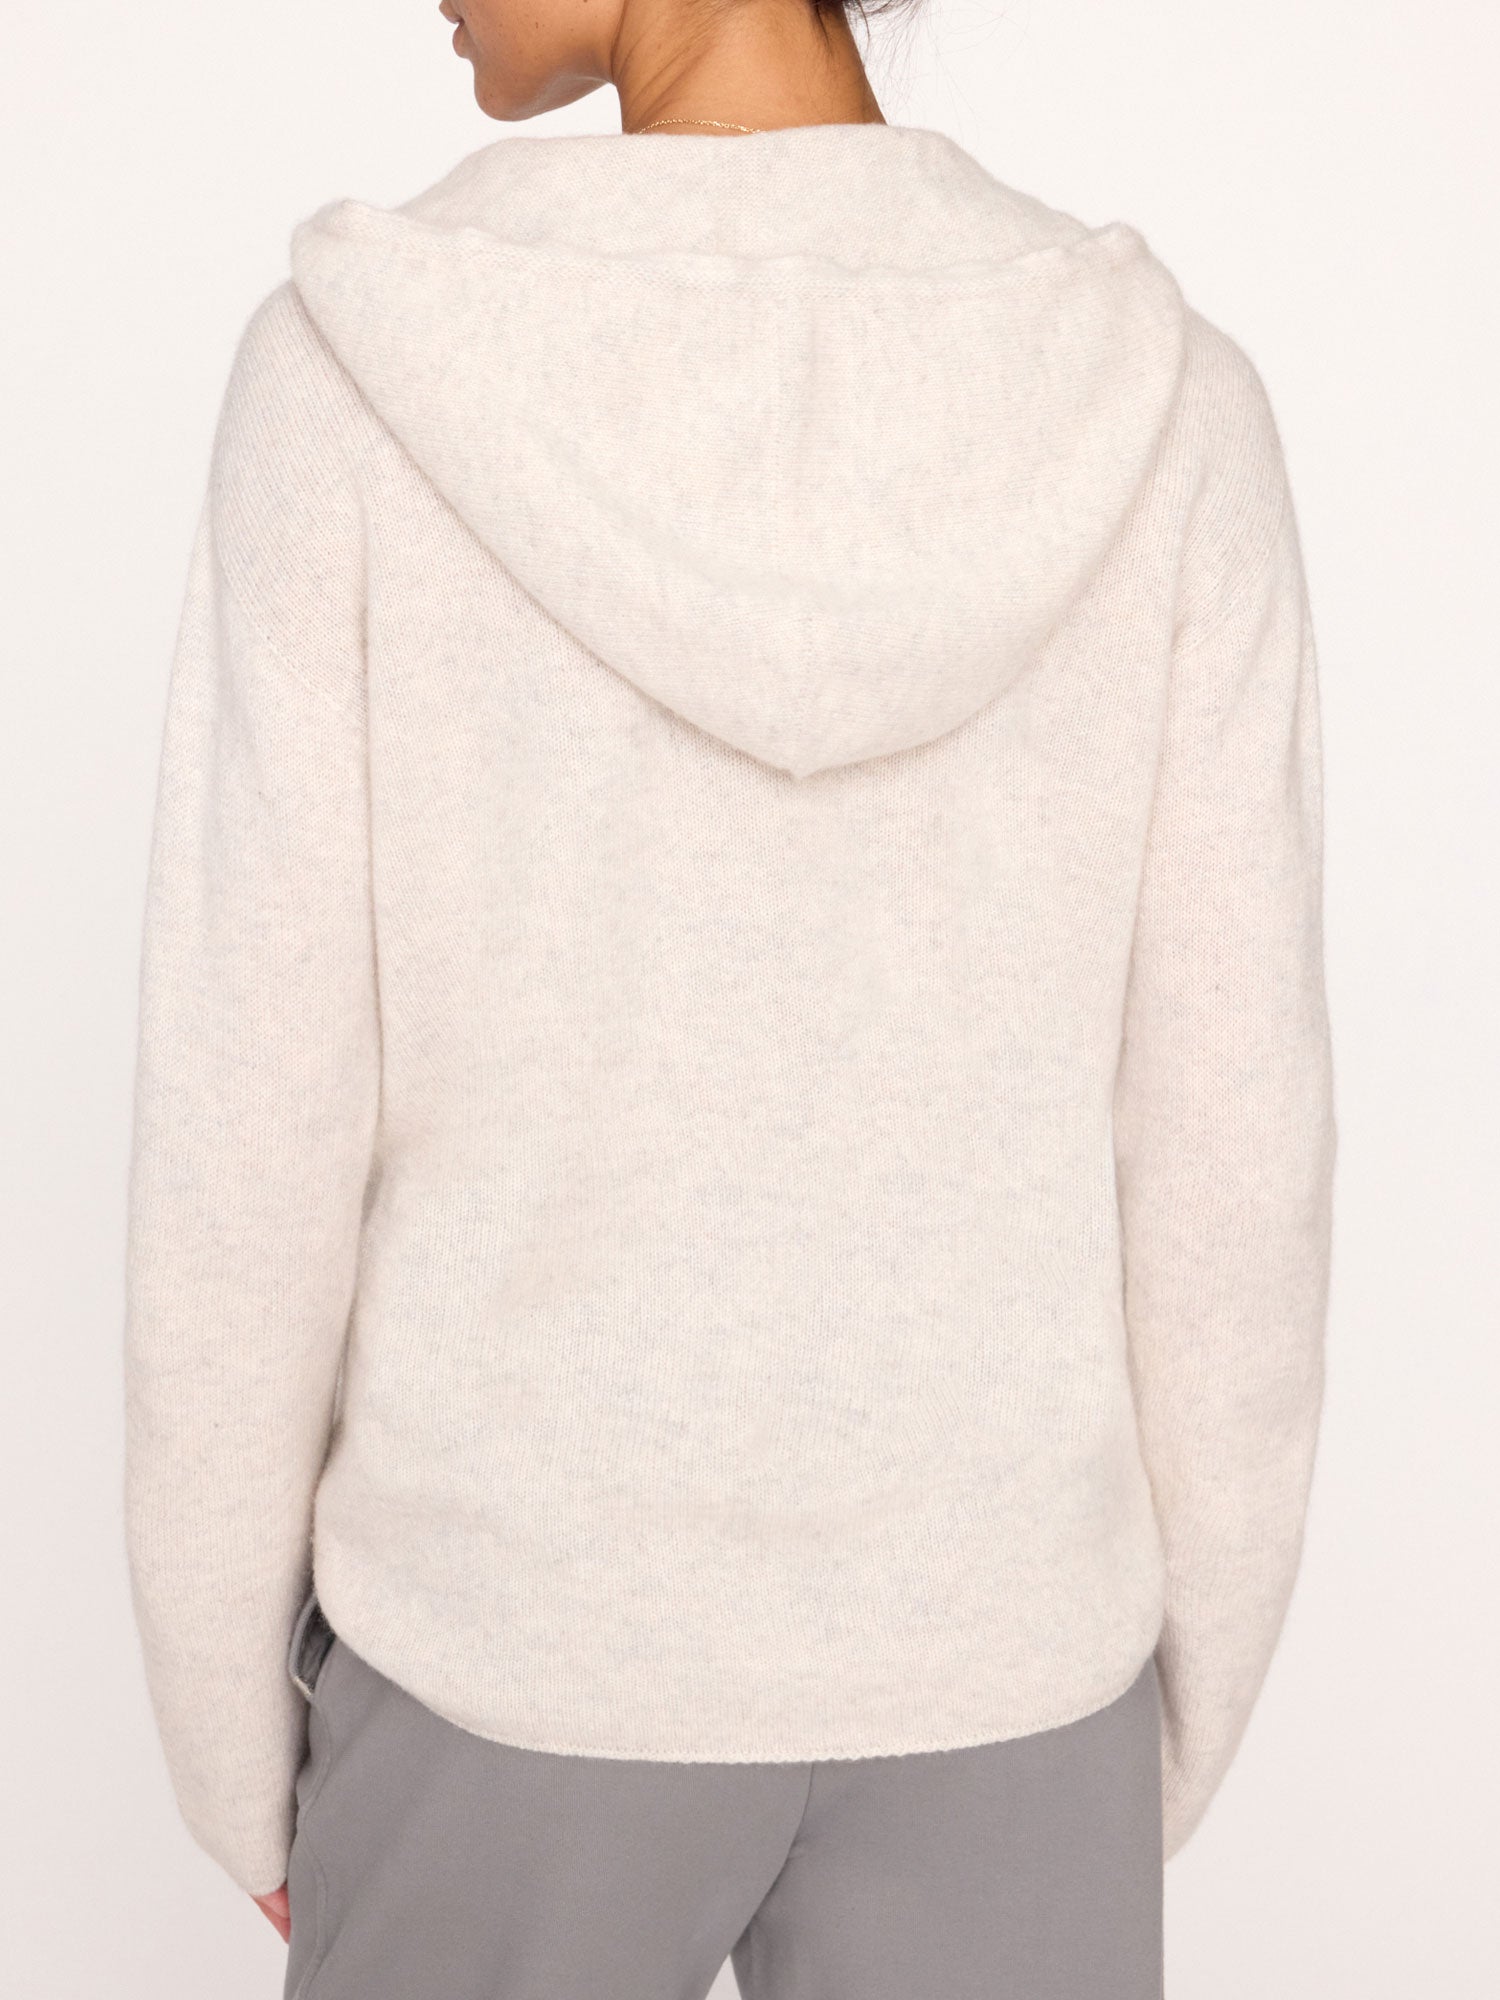 Cashmere beige hoodie sweater back view